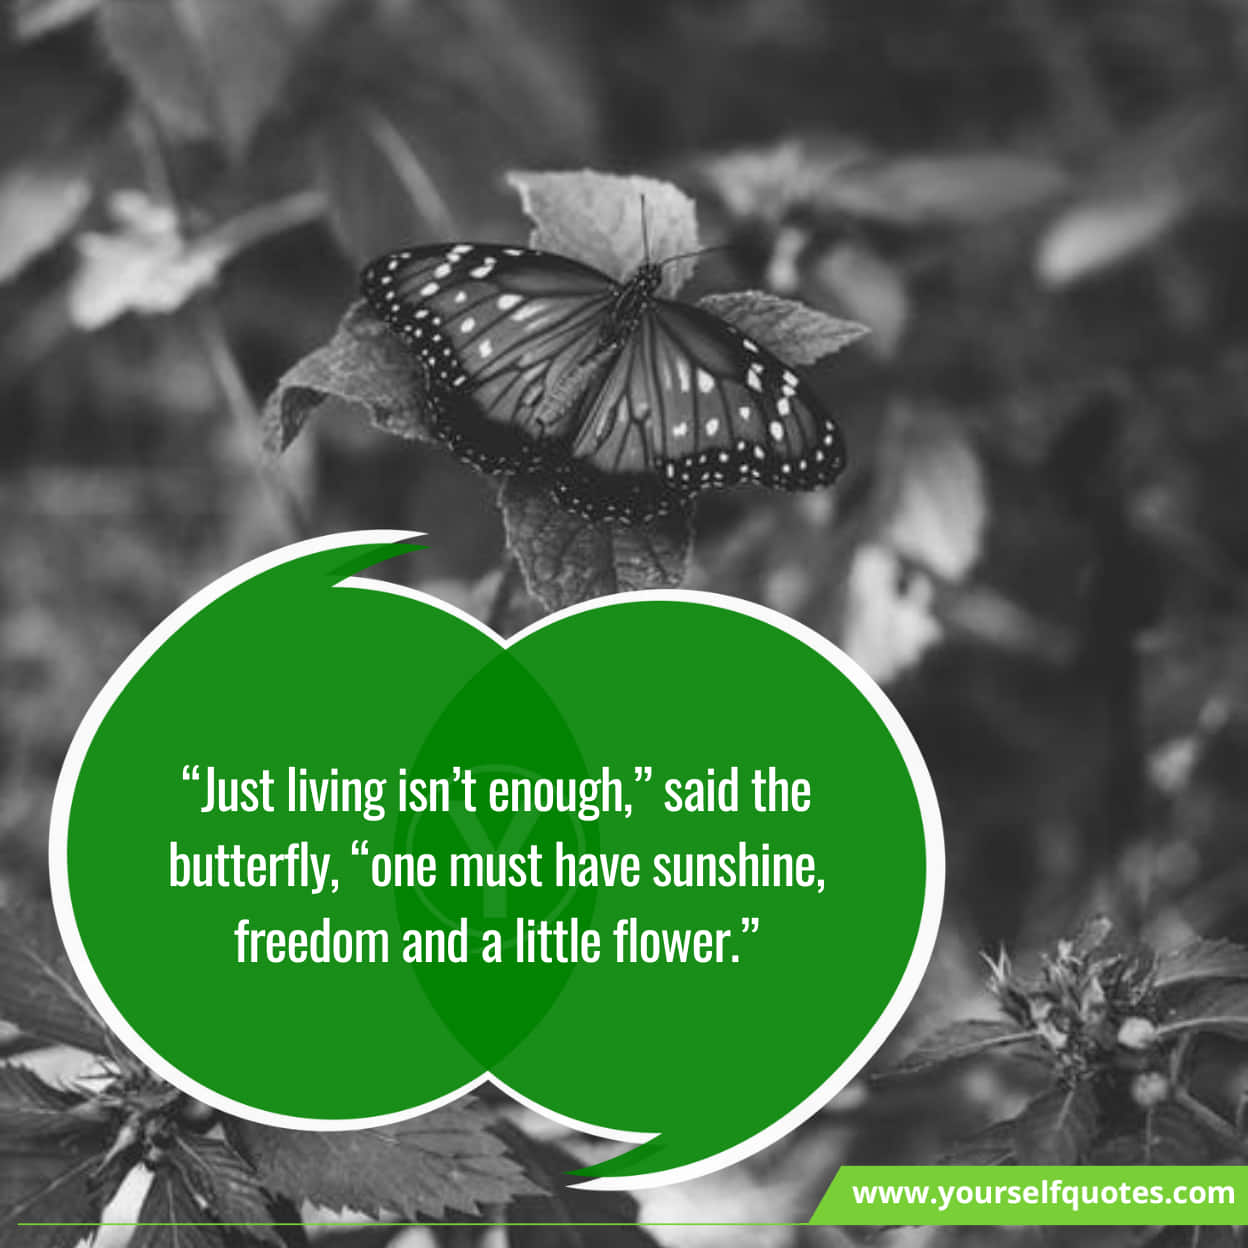 Latest Inspiring Quotes From Butterfly